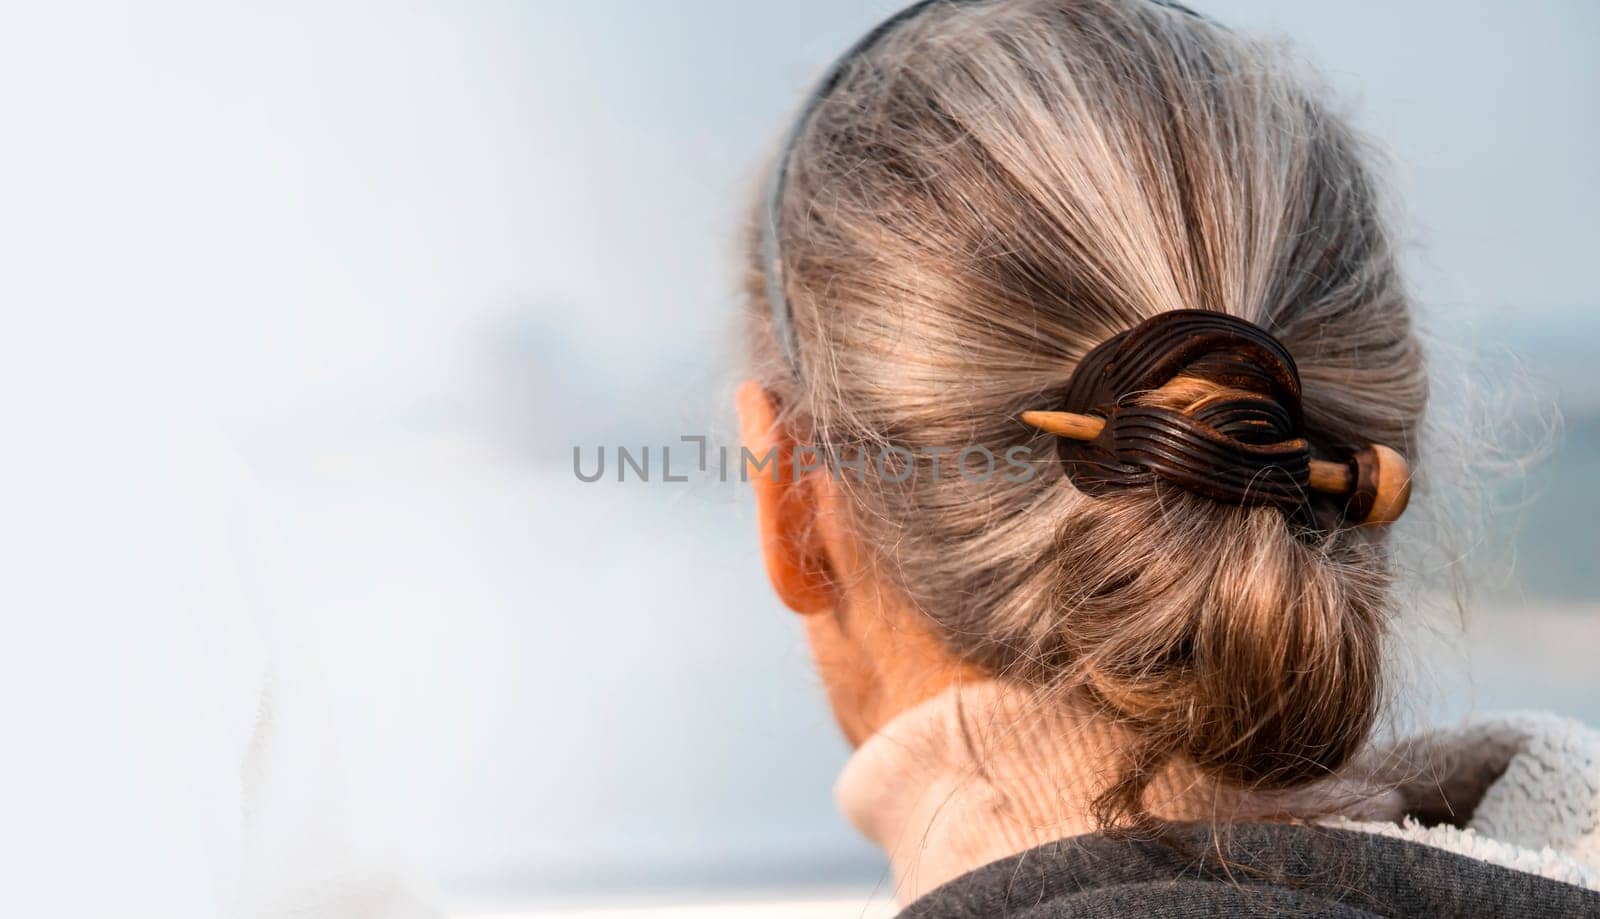 A woman with beautifully styled gray hair, fastened with a hairpin, looks forward, an elderly lady takes care of the health and beauty of her hair and accepts on her natural color.